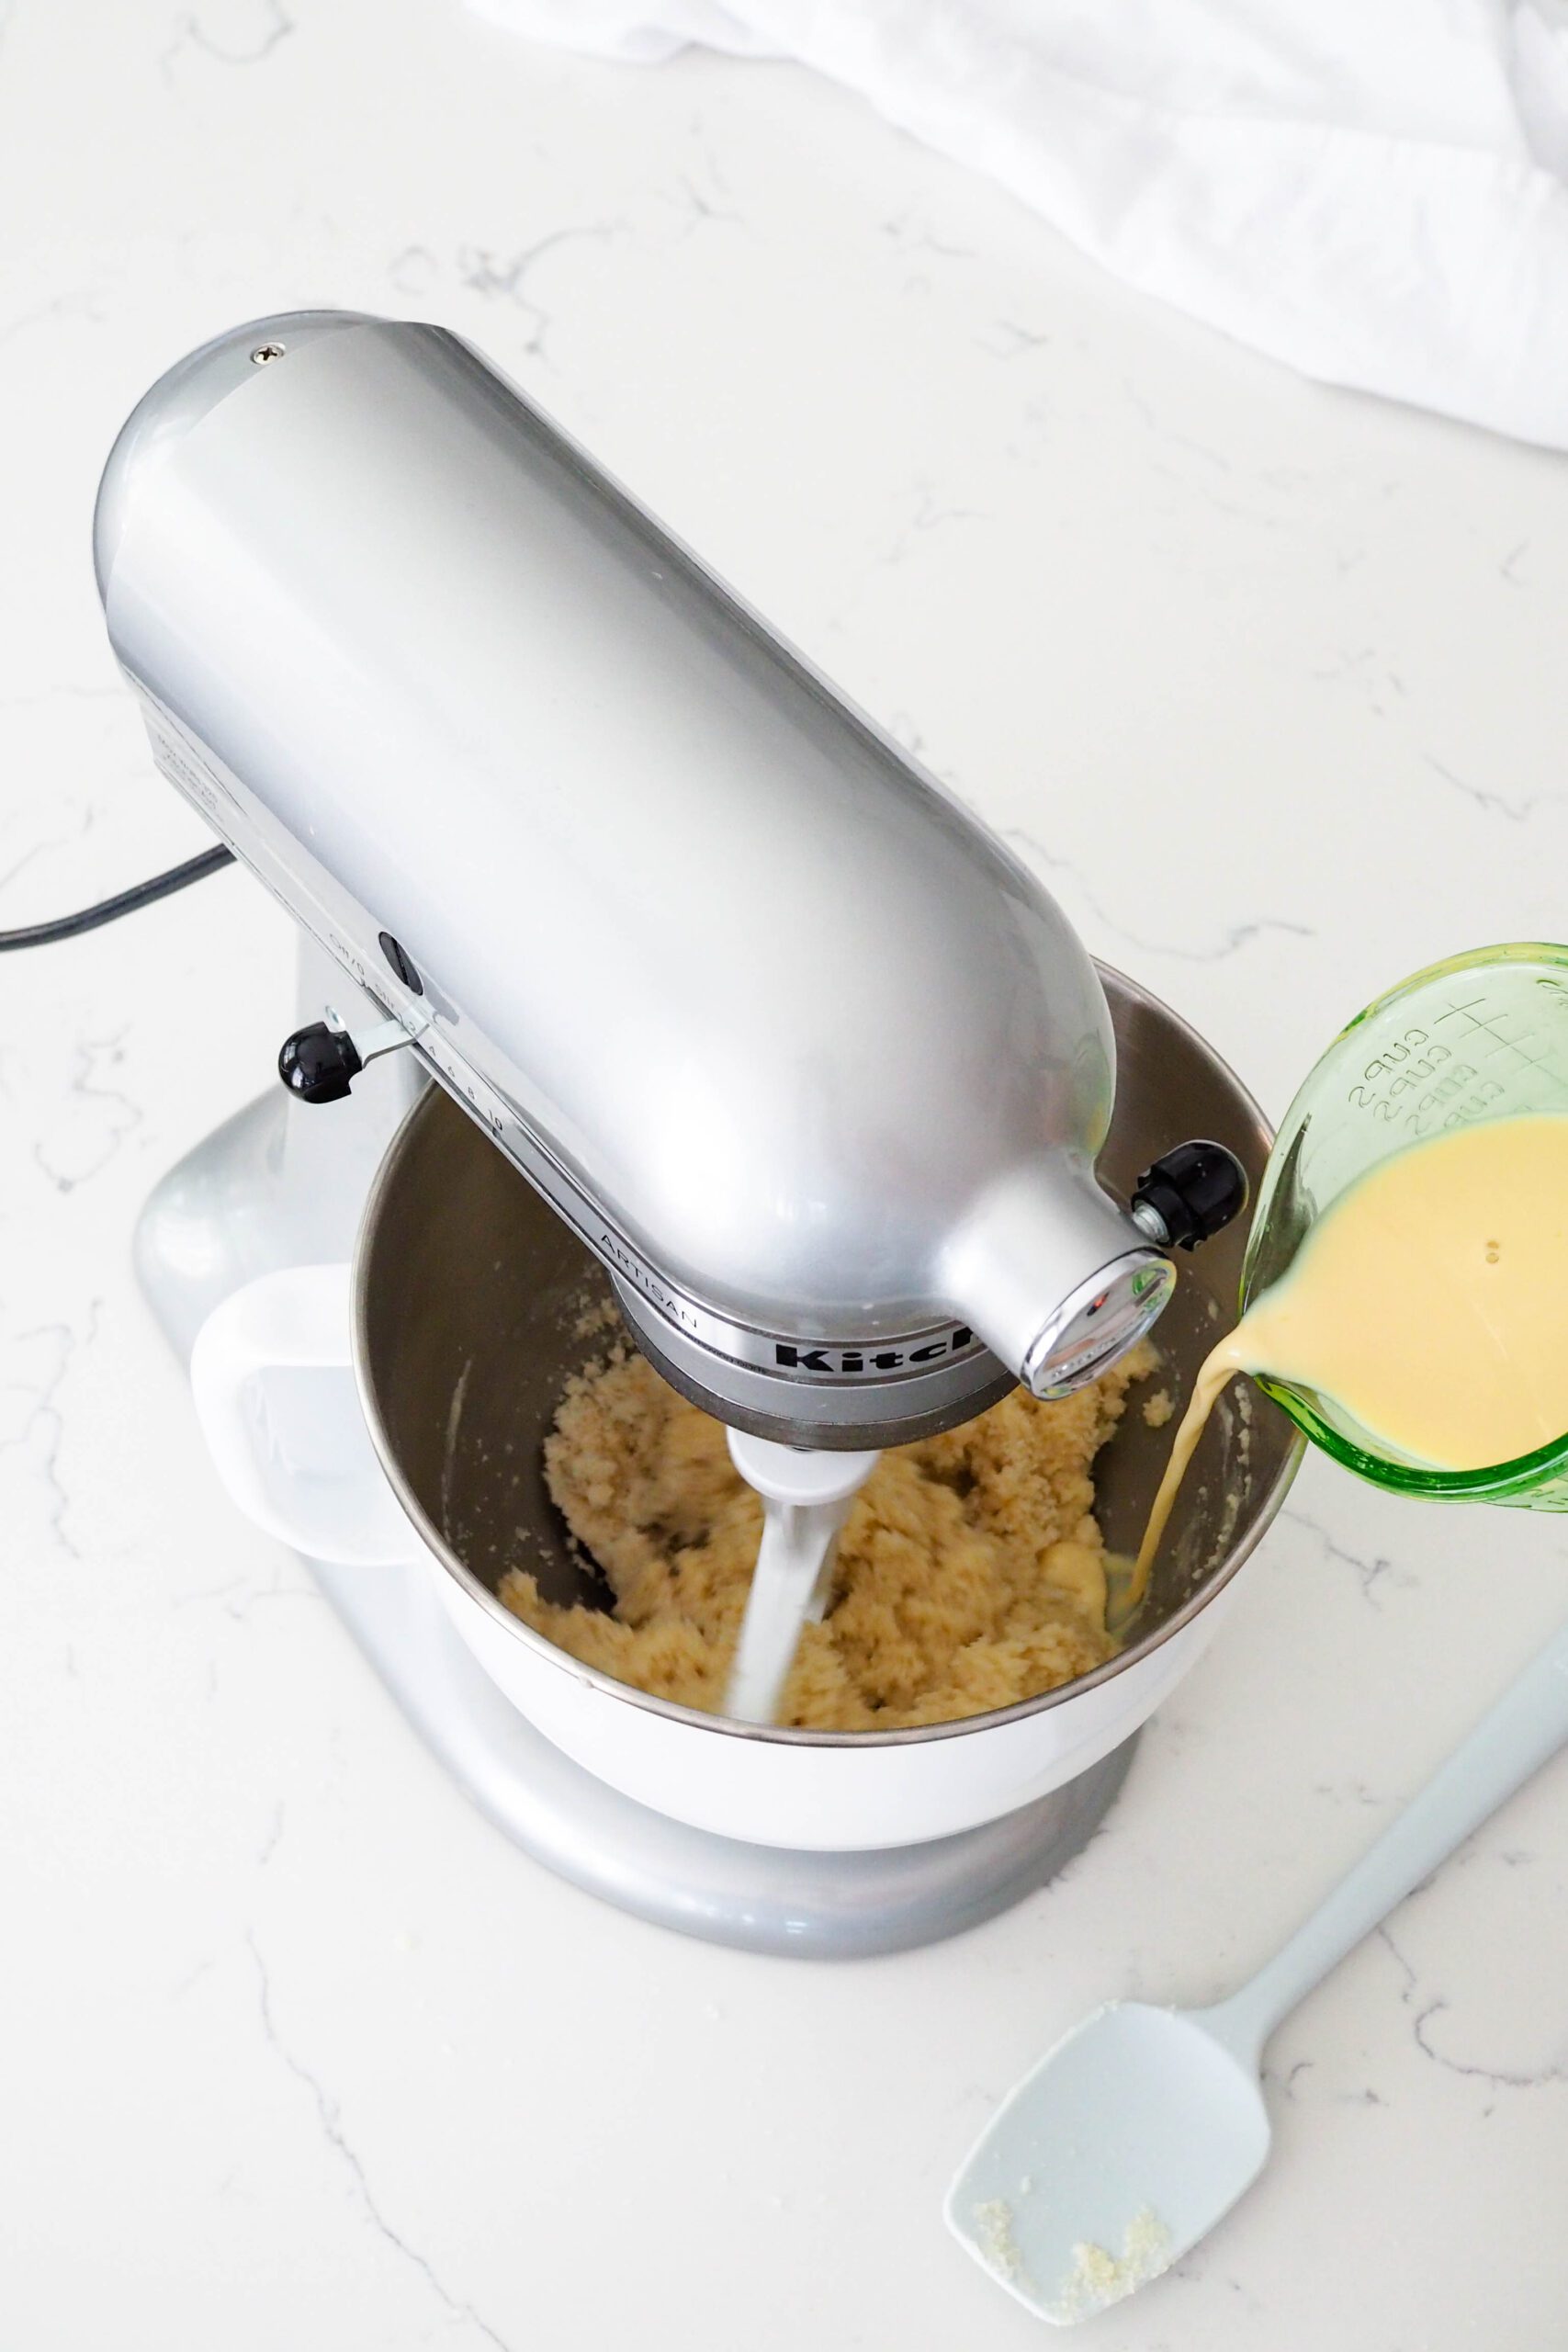 A spouted measuring cup pours wet ingredients into the bowl of a stand mixer.